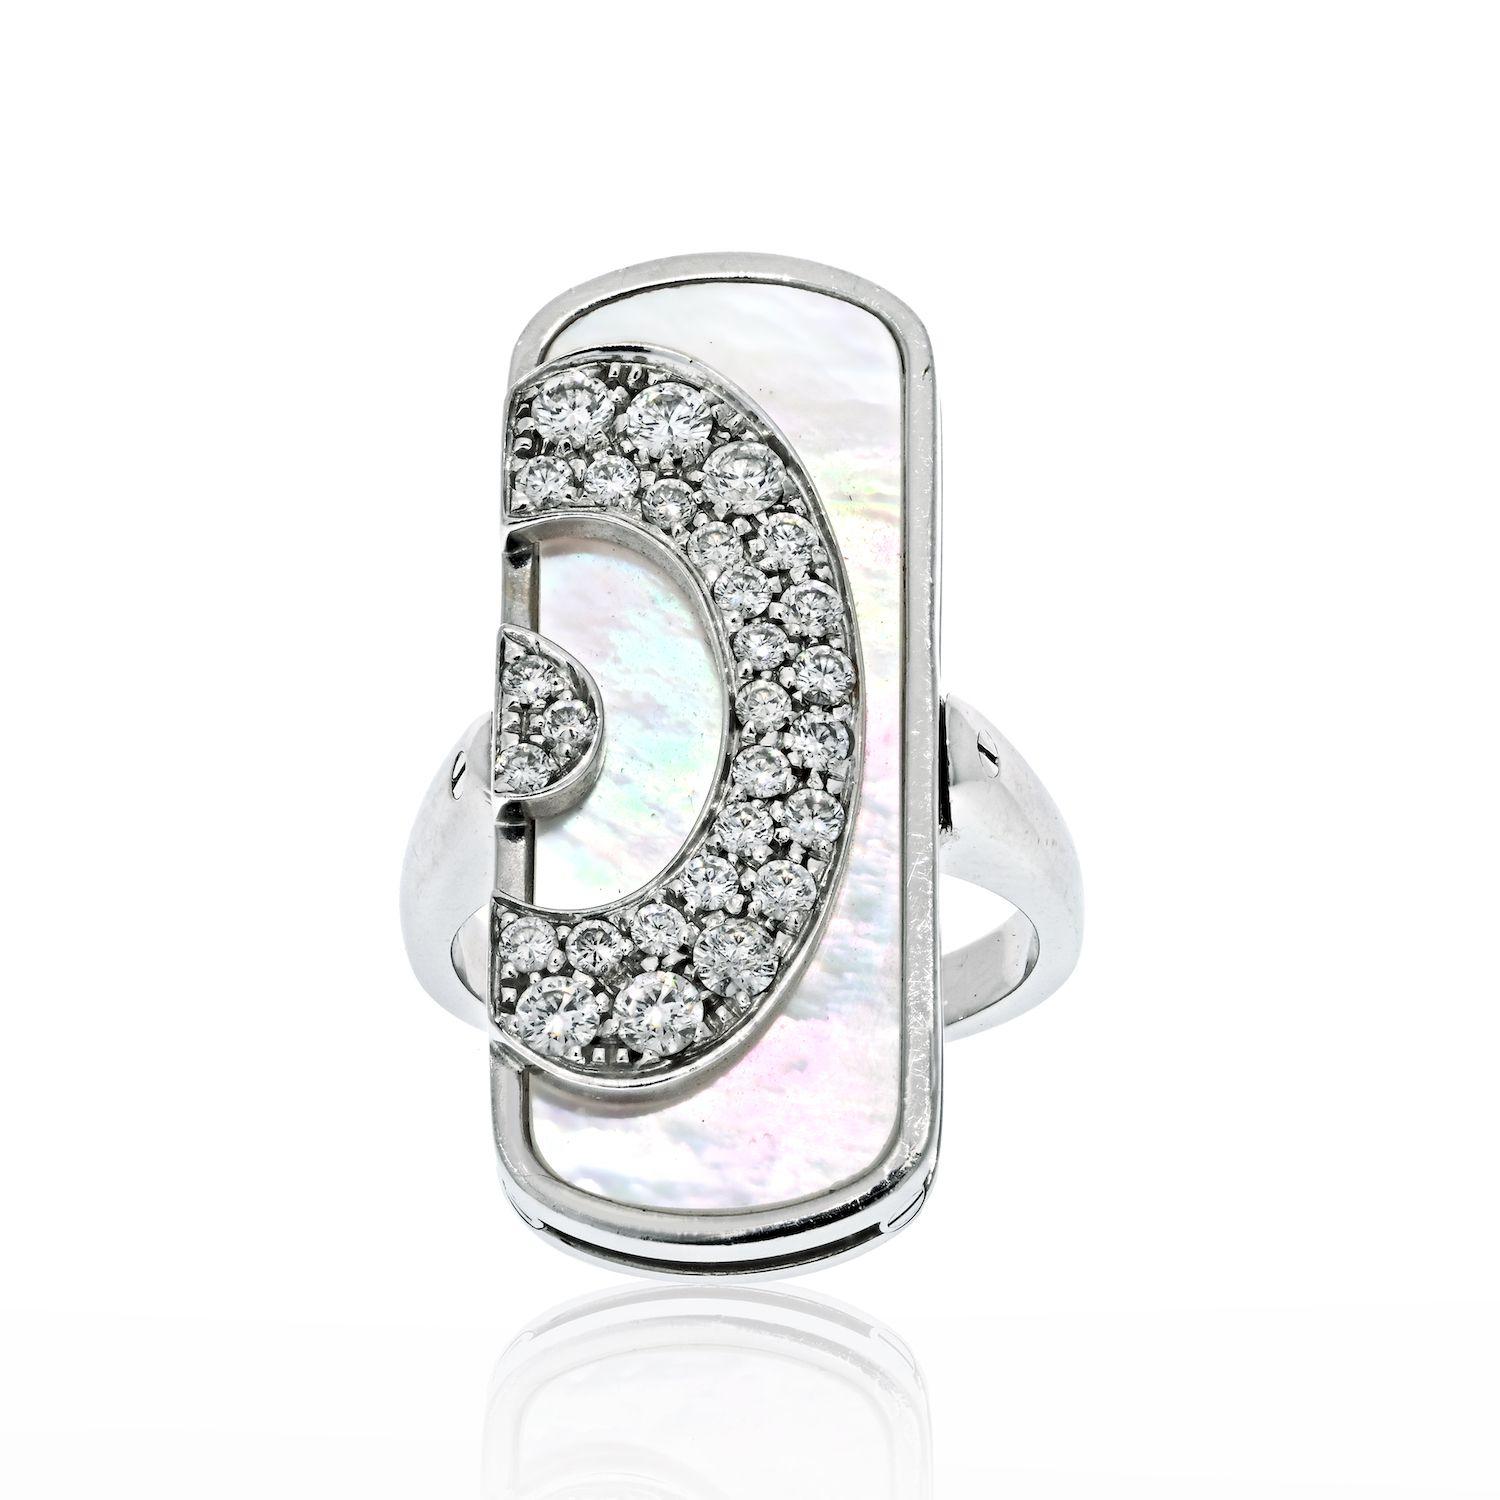 Bvlgari 18K White Gold Mother of Pearl Illusion Diamond Cocktail Ring For Sale 1